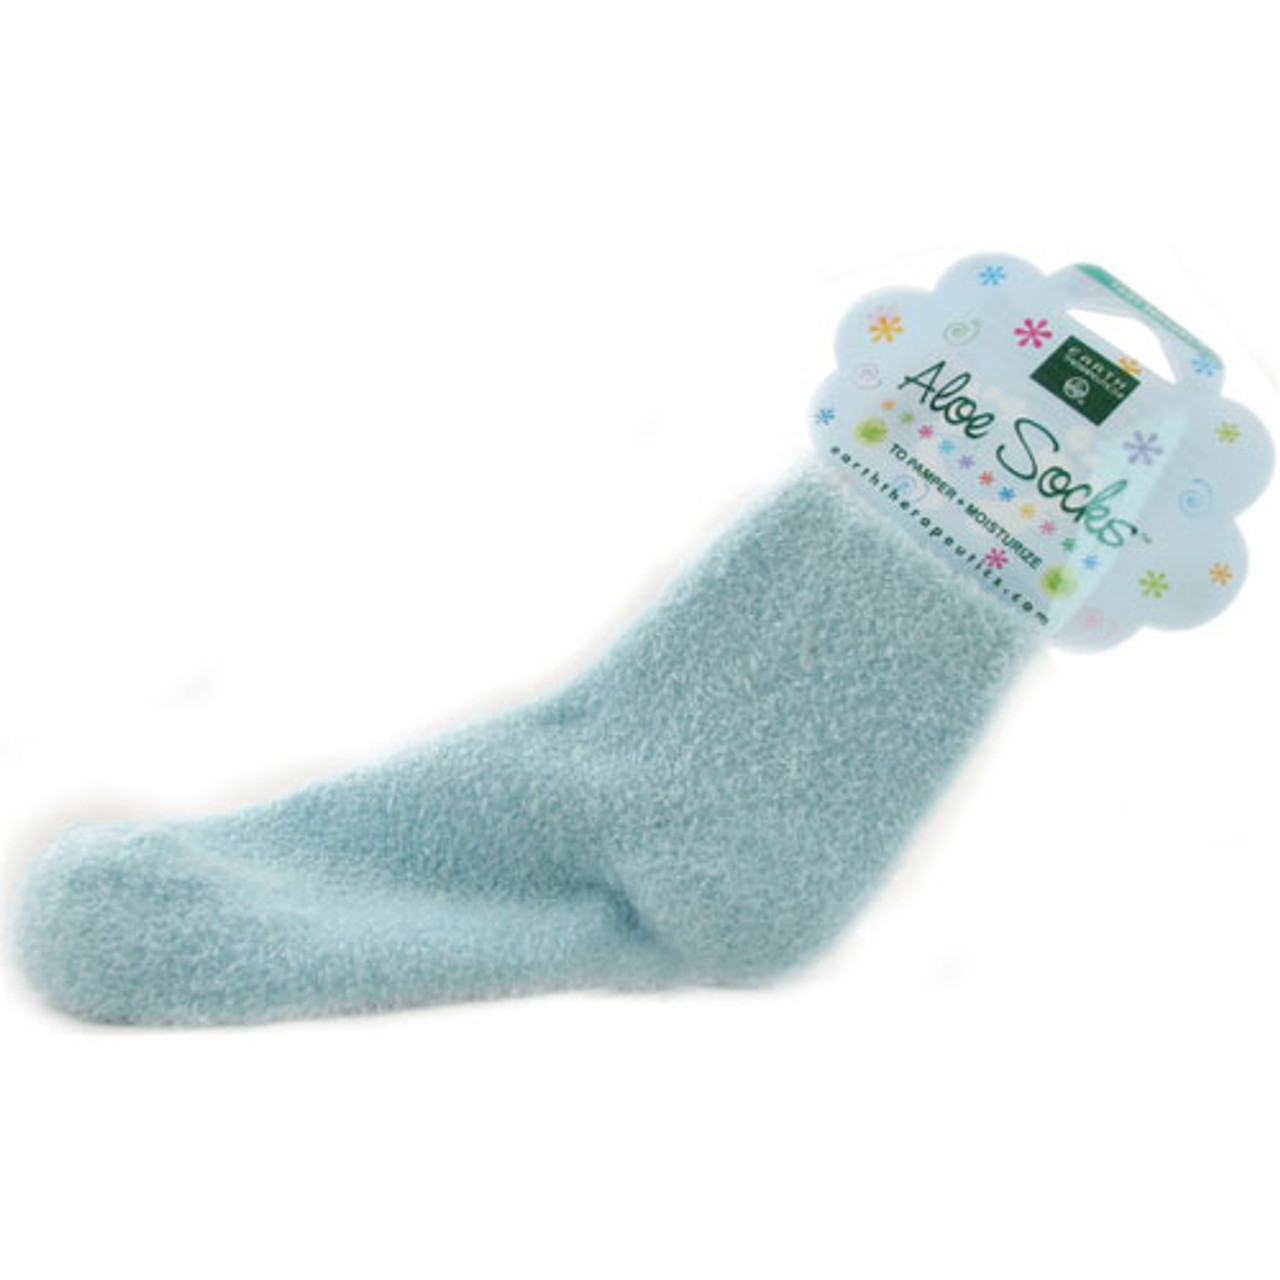 Earth Therapeutics Aloe Blue Socks Foot Therapy To Pamper & Moisturize - 1  Pair 